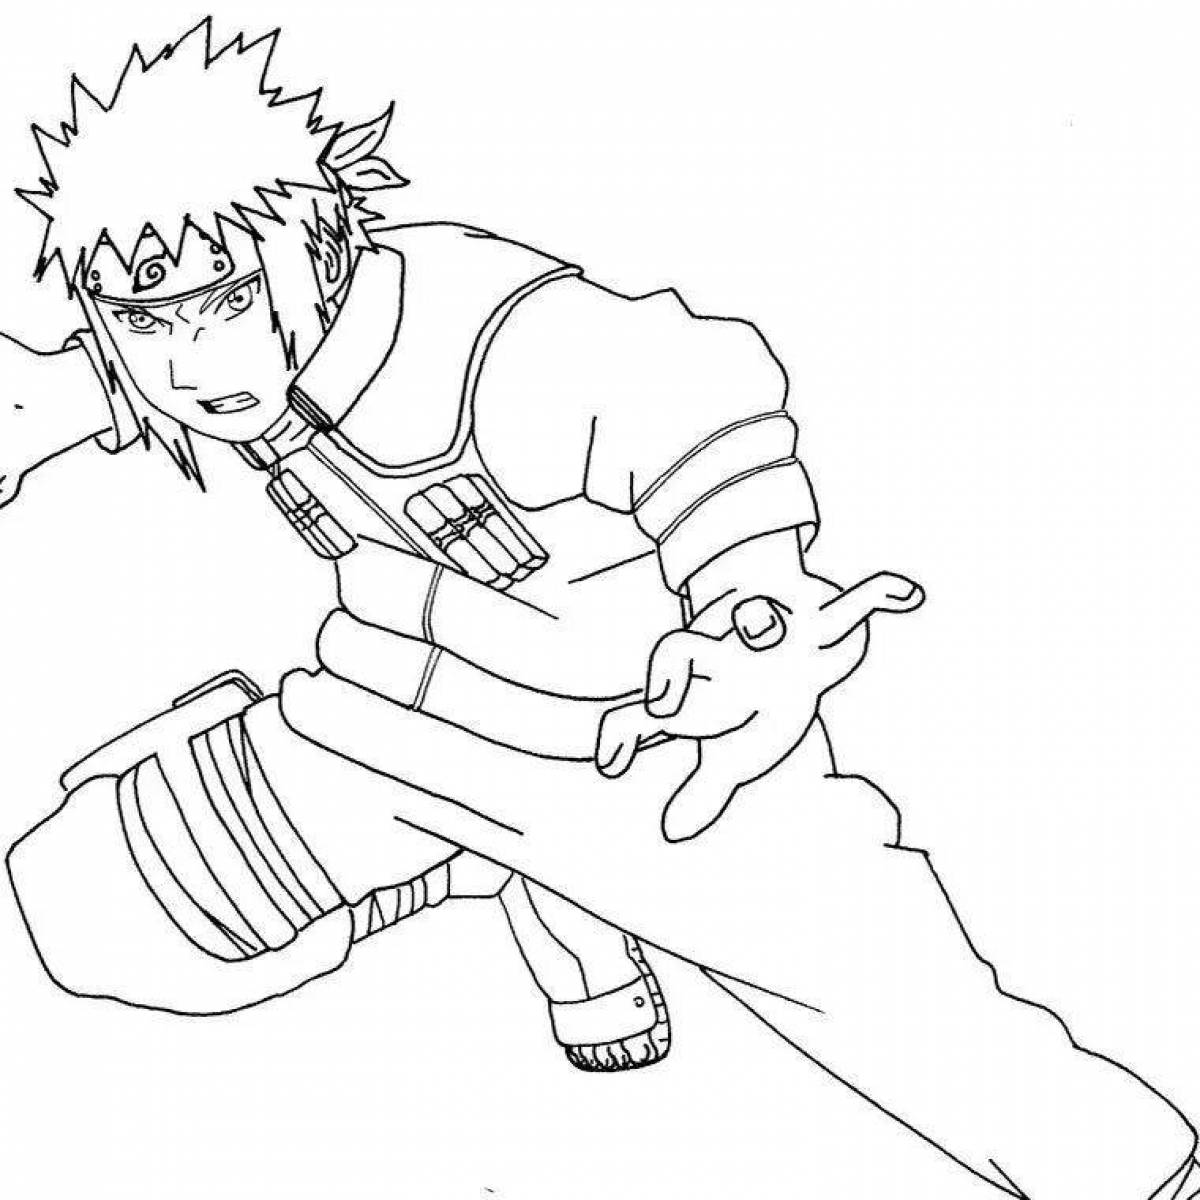 Playful naruto coloring page for boys